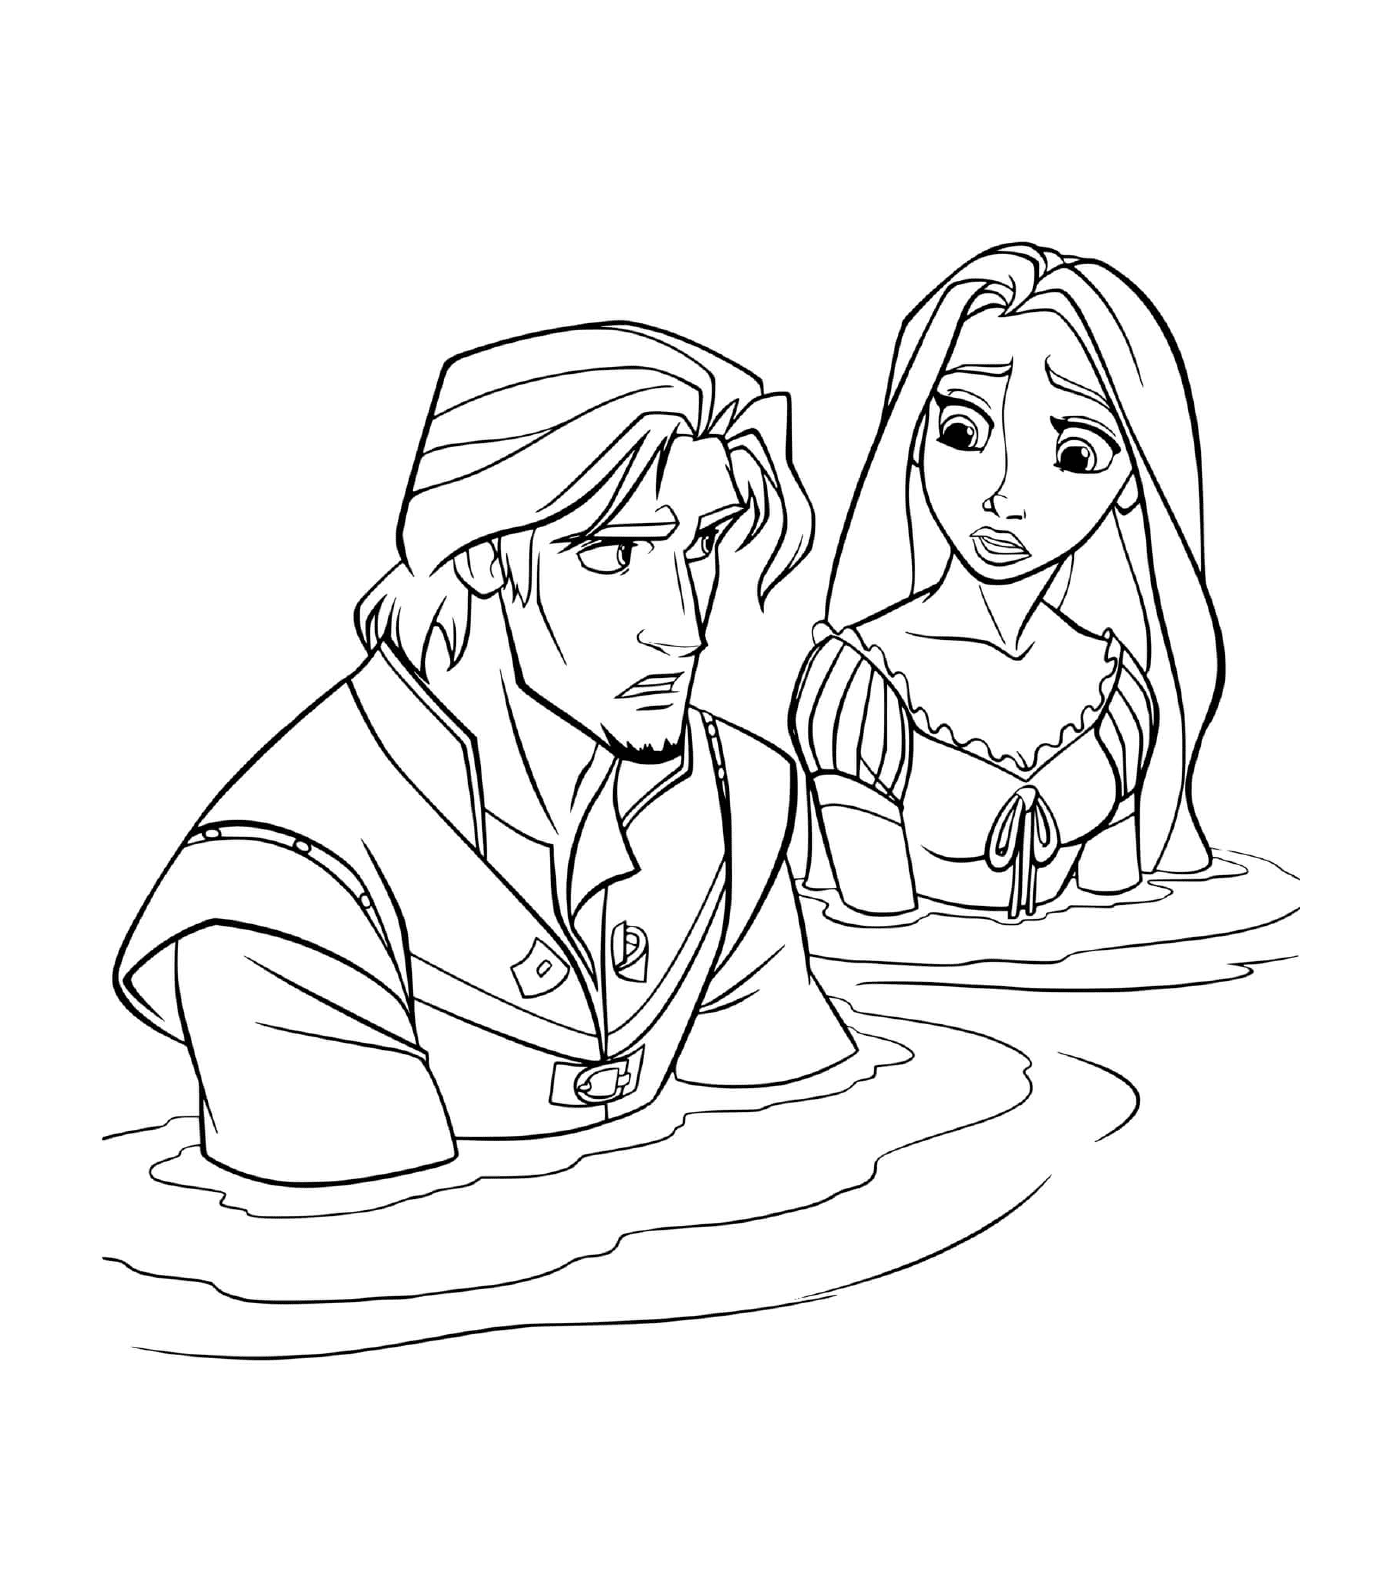  Flynn Rider and Raiponce in water 